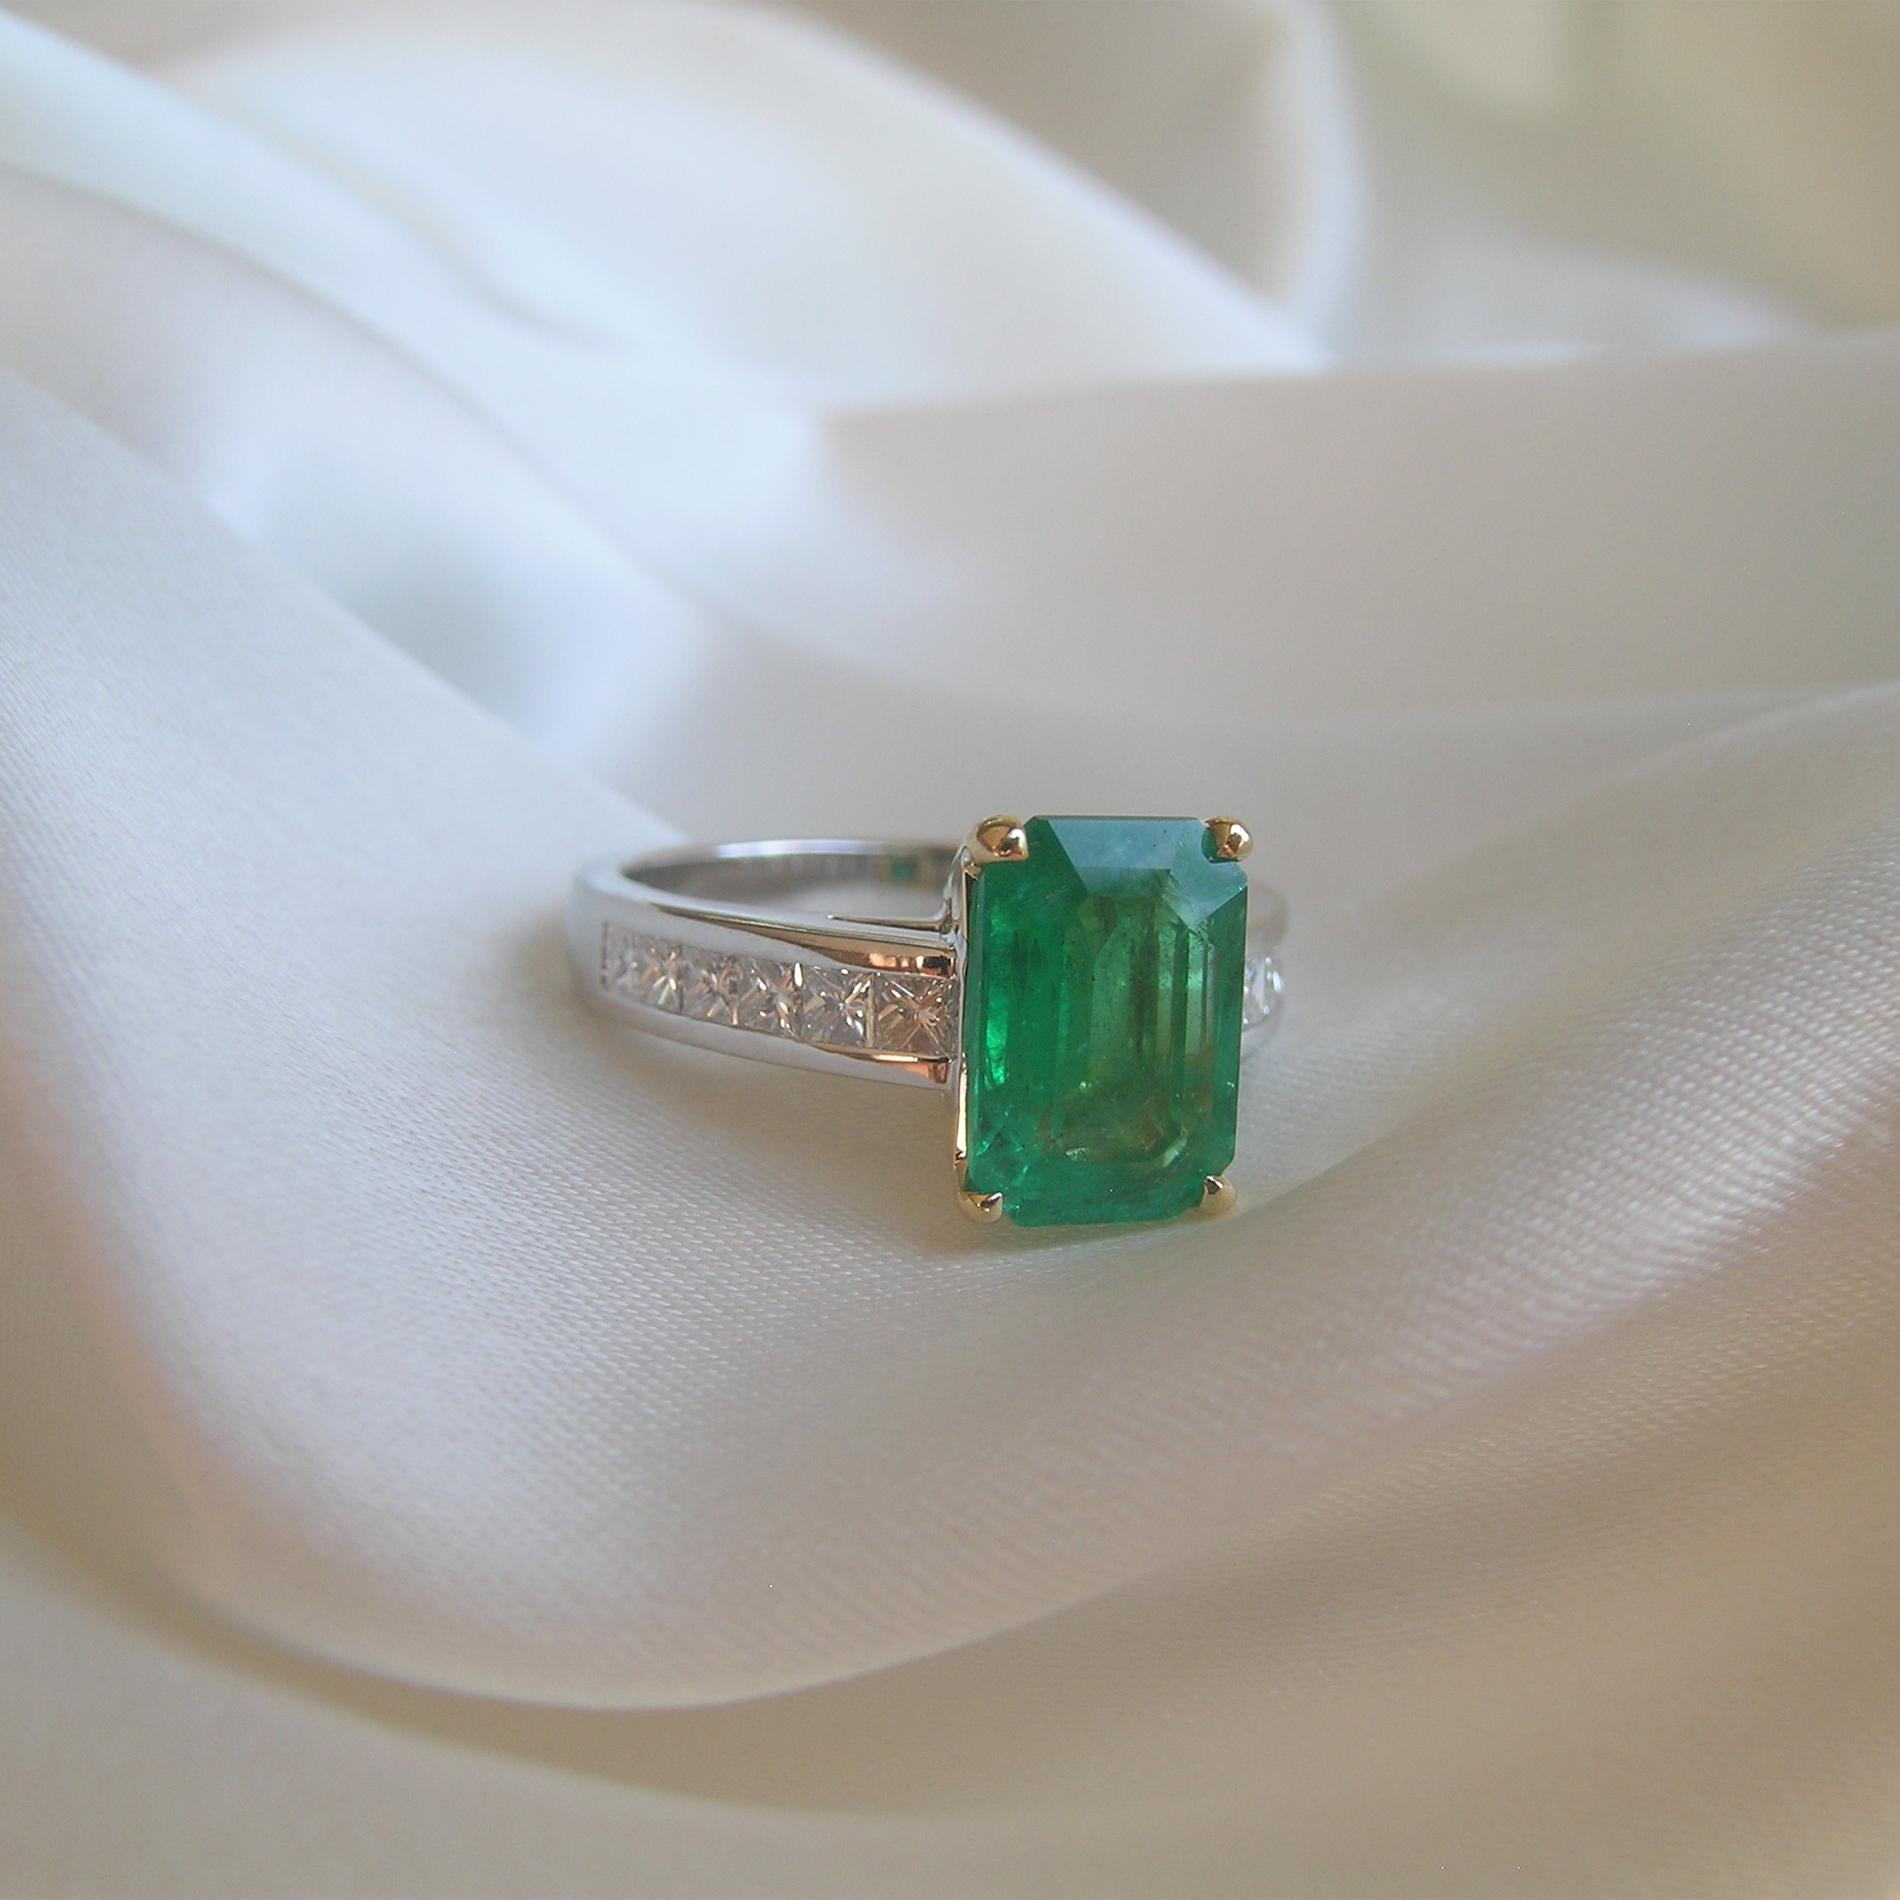 This small, very high quality Emerald is the showcase for this 18k White and Yellow Gold Cocktail Ring.
The  diamonds are channel set creating a sparkling back ground for the Emerald.  A classic example of every day luxury, this ring is meant to be